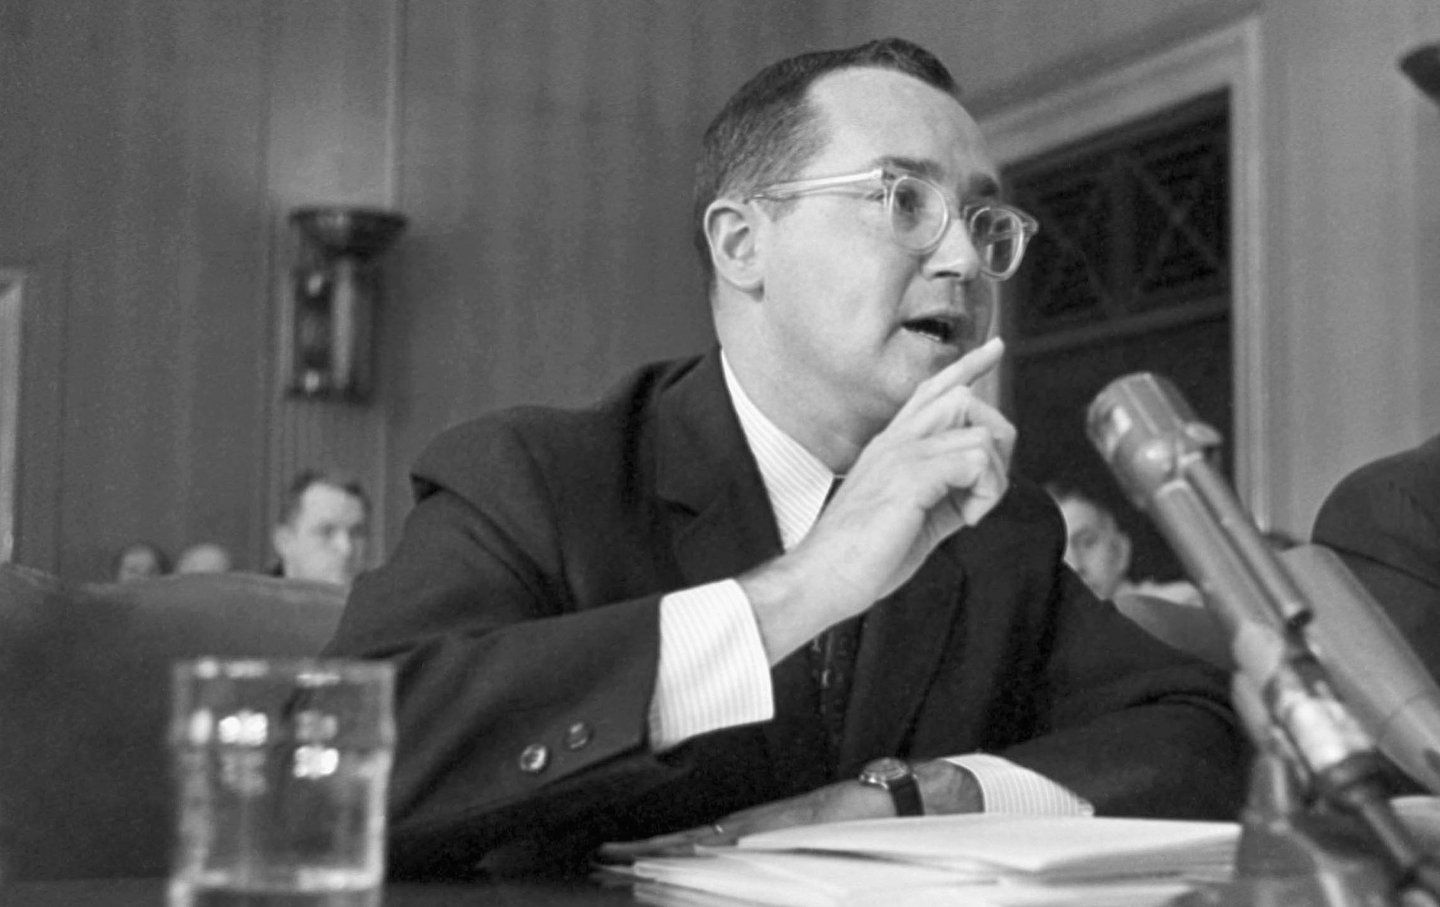 Then-FCC chair Newton Minow appearing before a Senate subcommittee in 1961